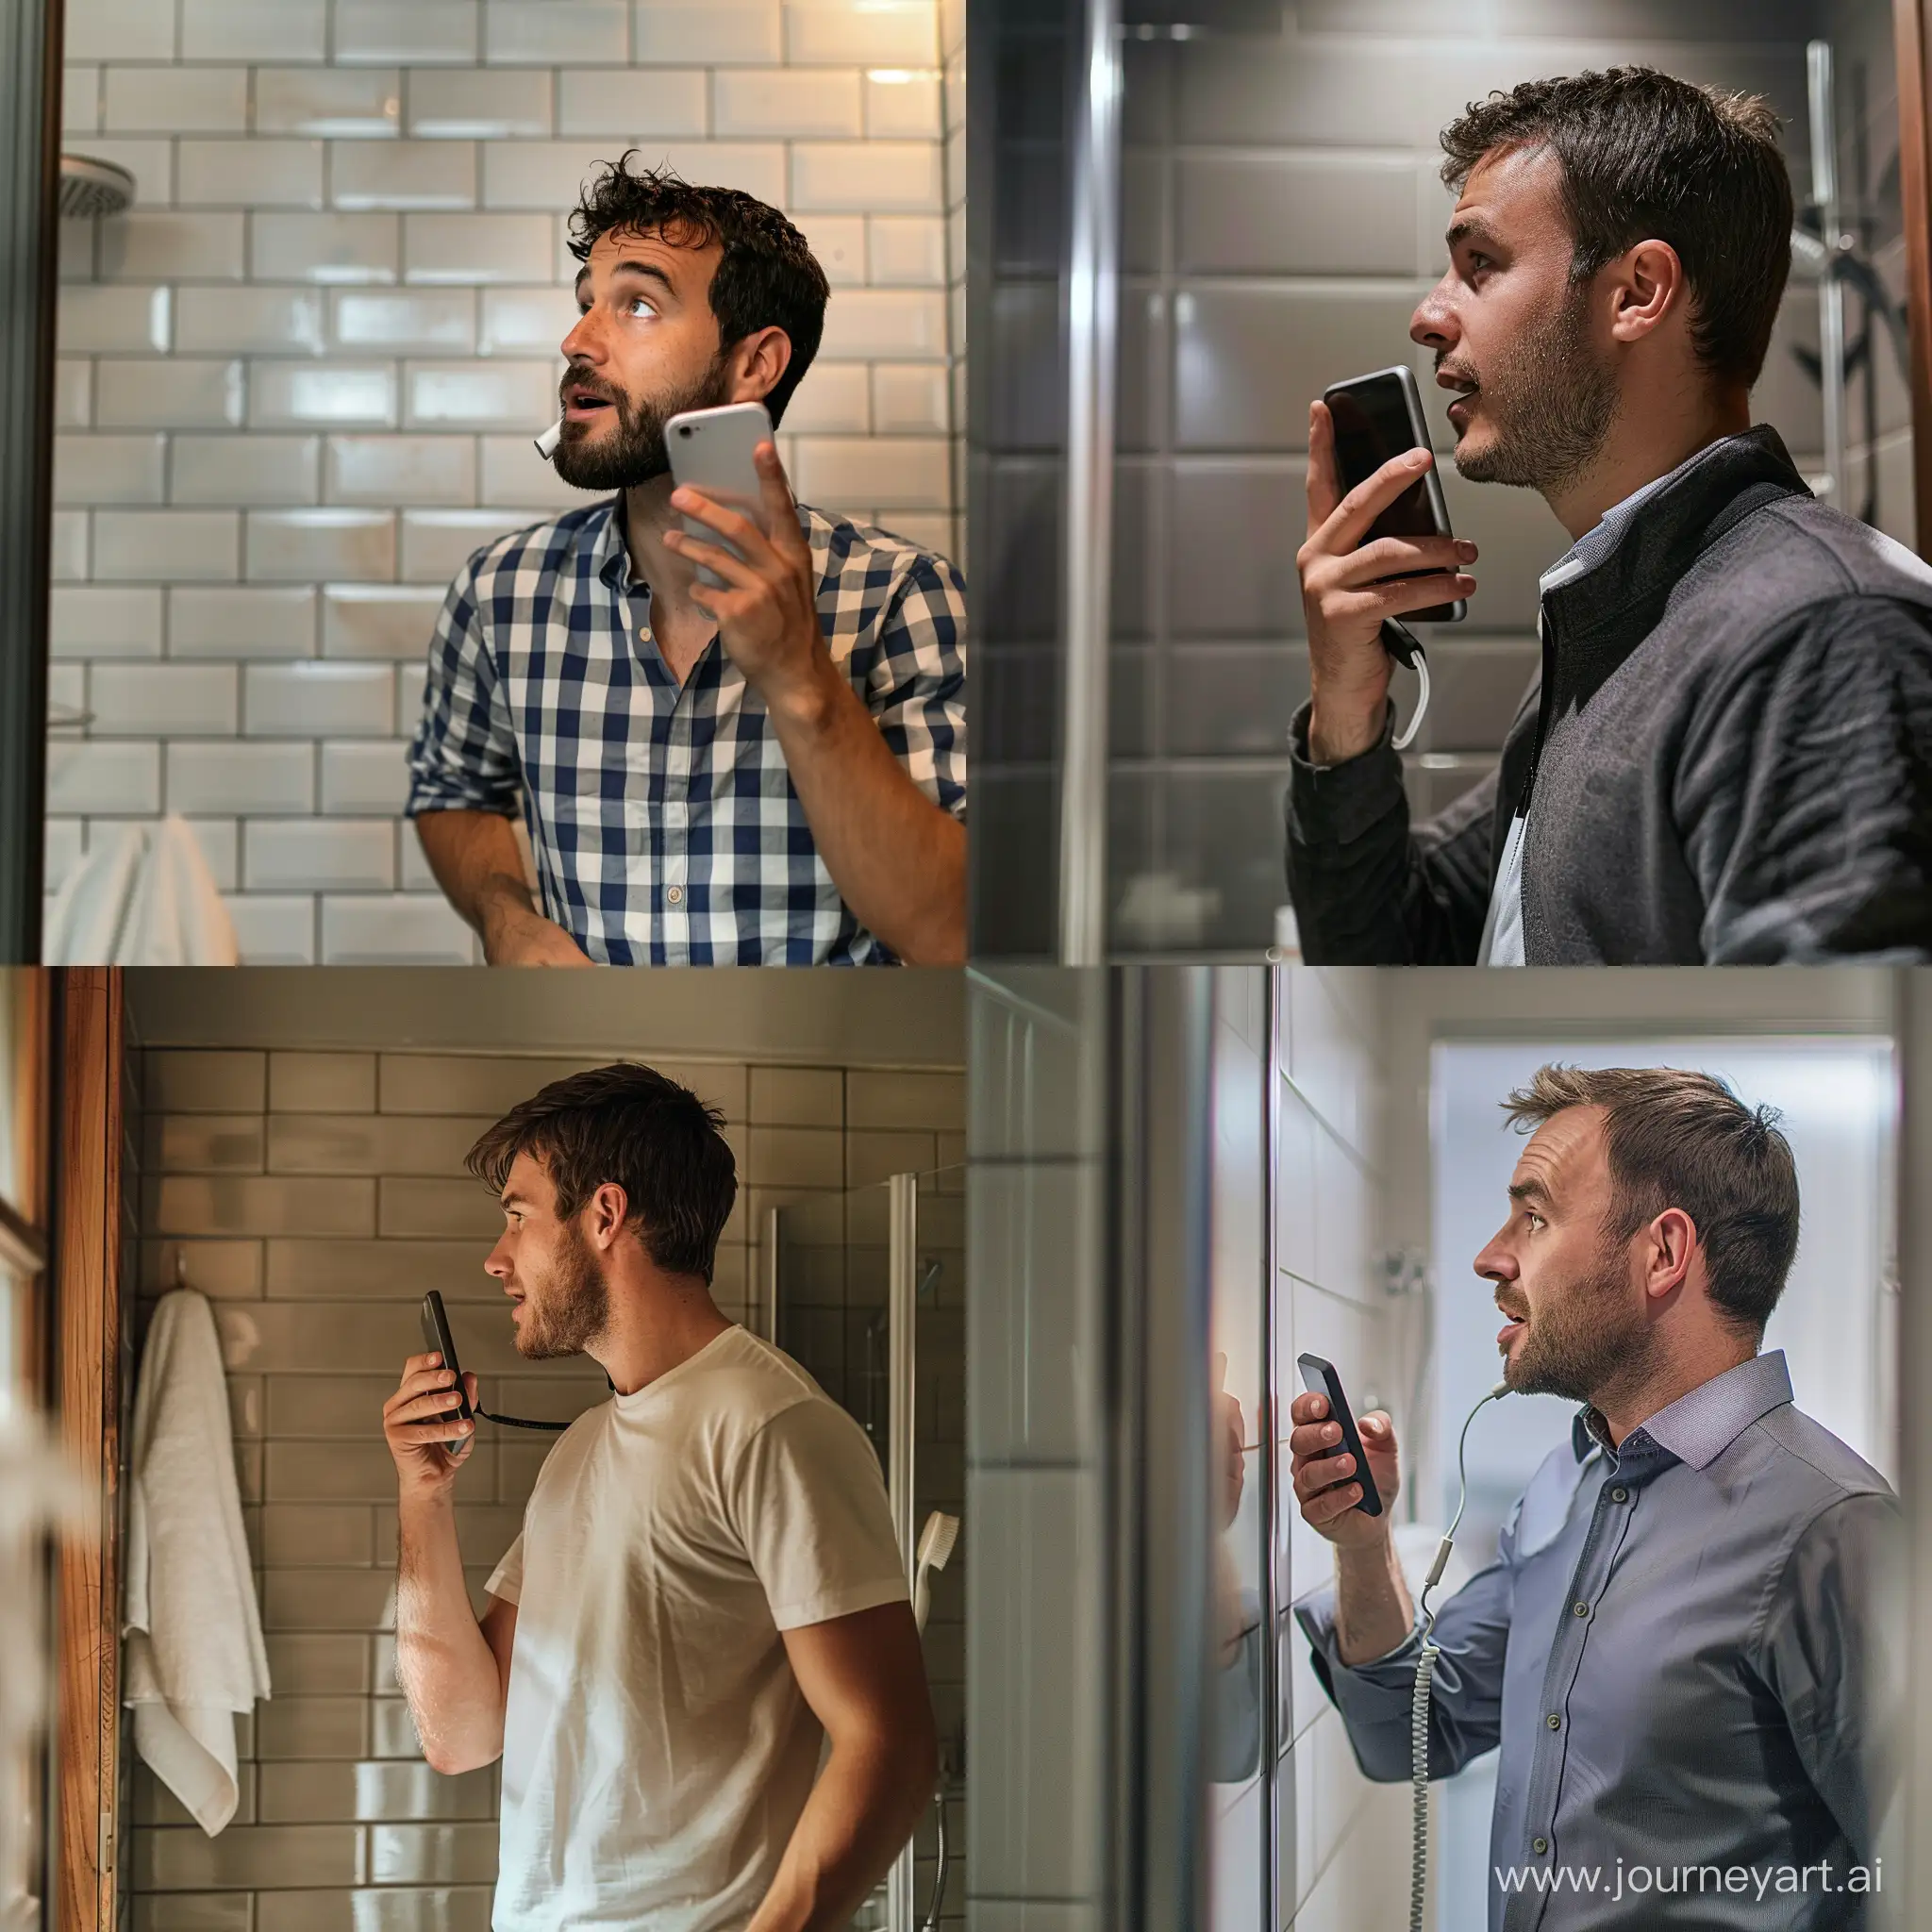 A man talking with phone in the bathroom wondering